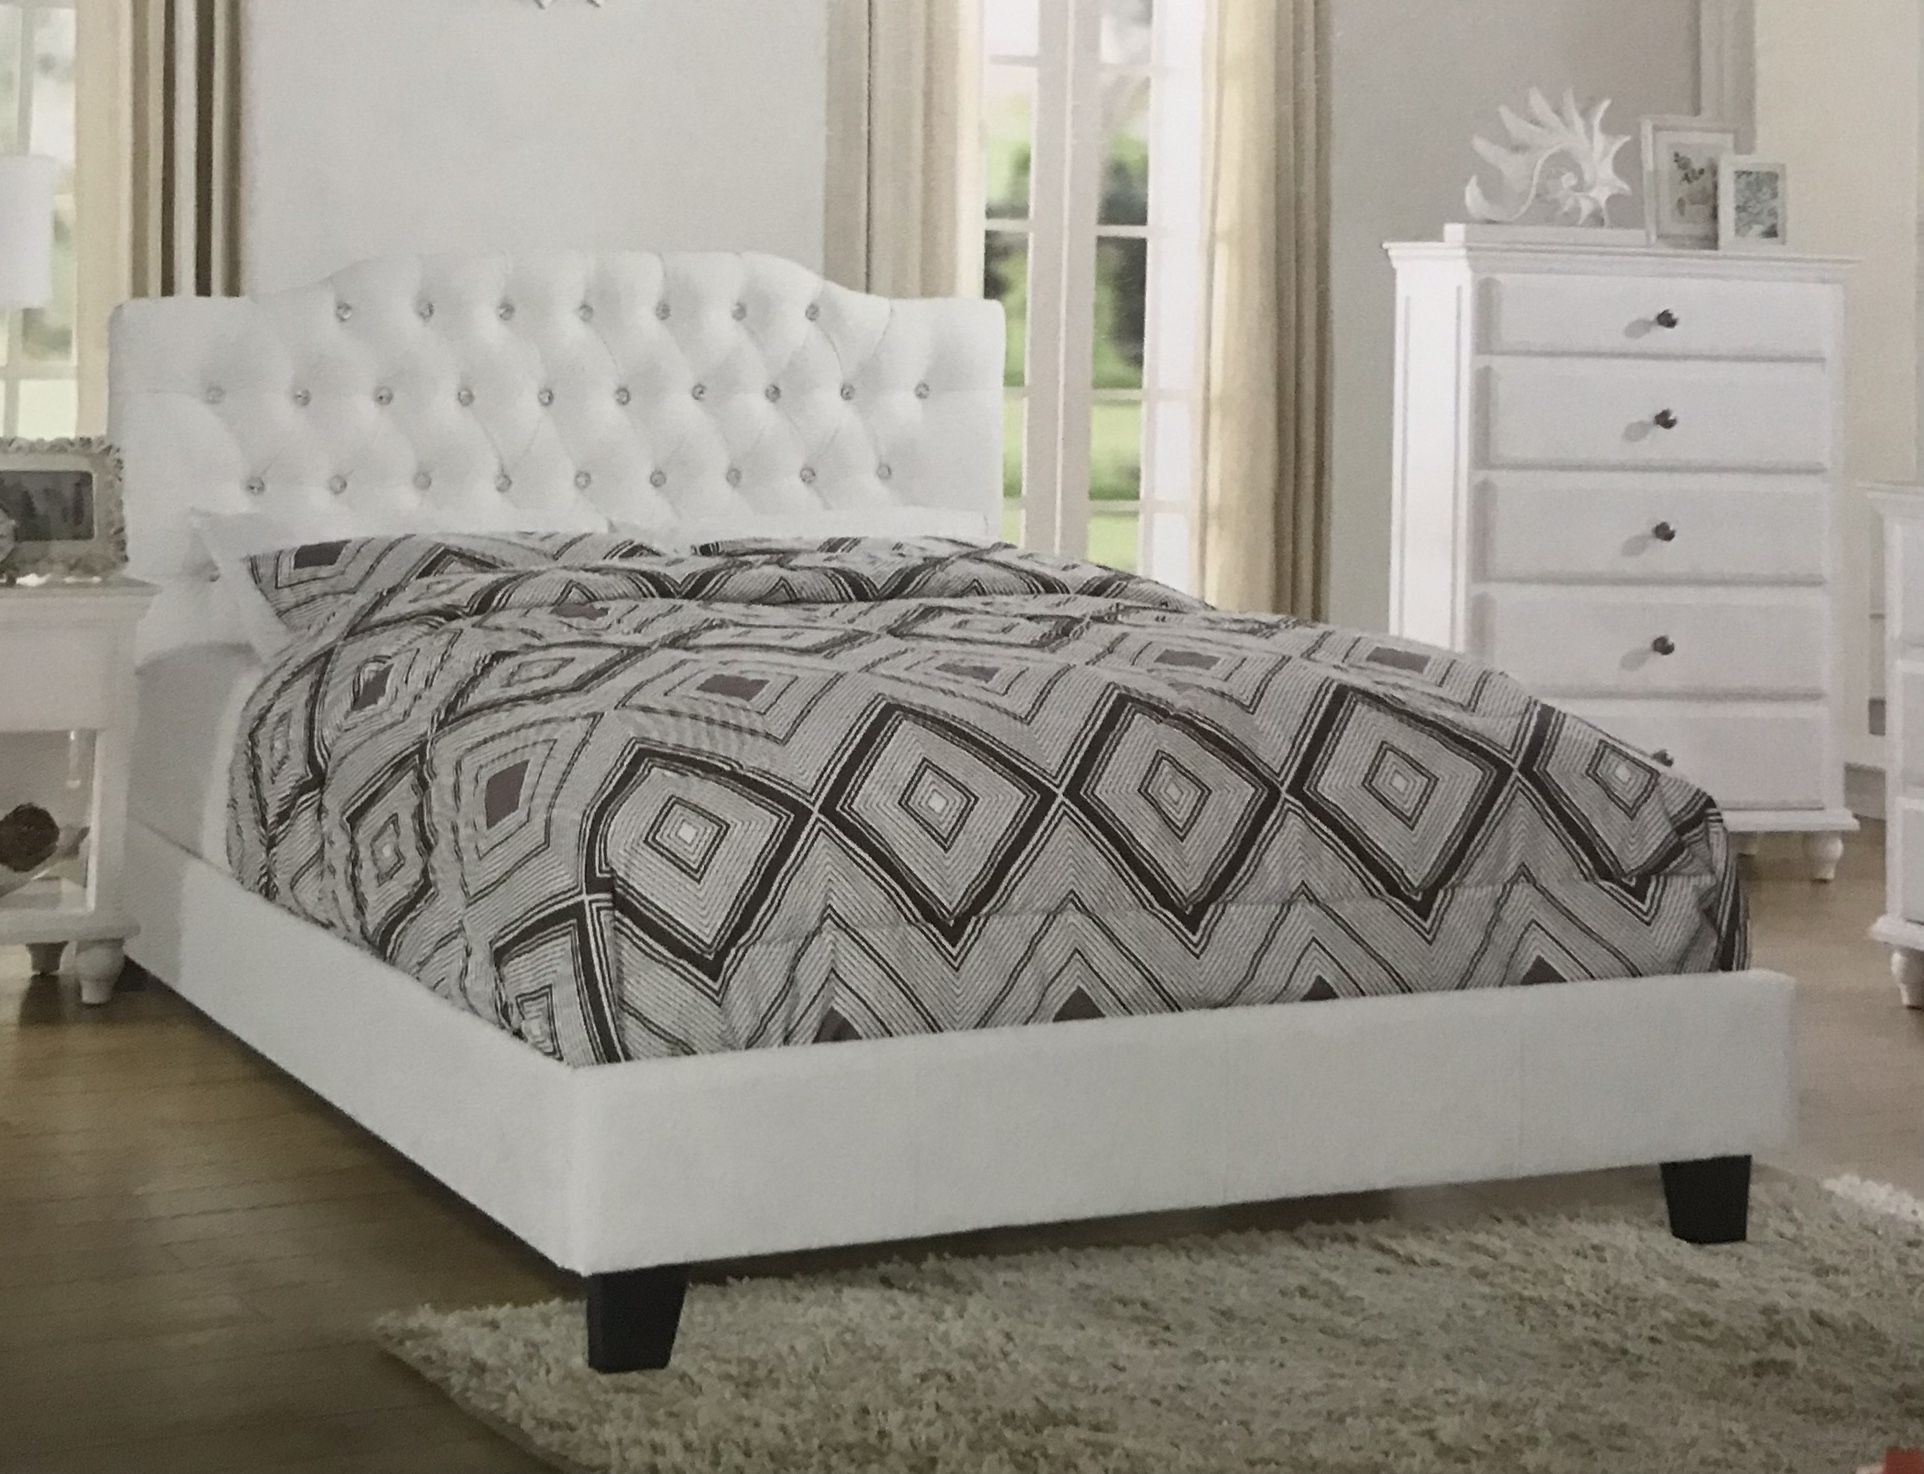 King Size Bed $399.